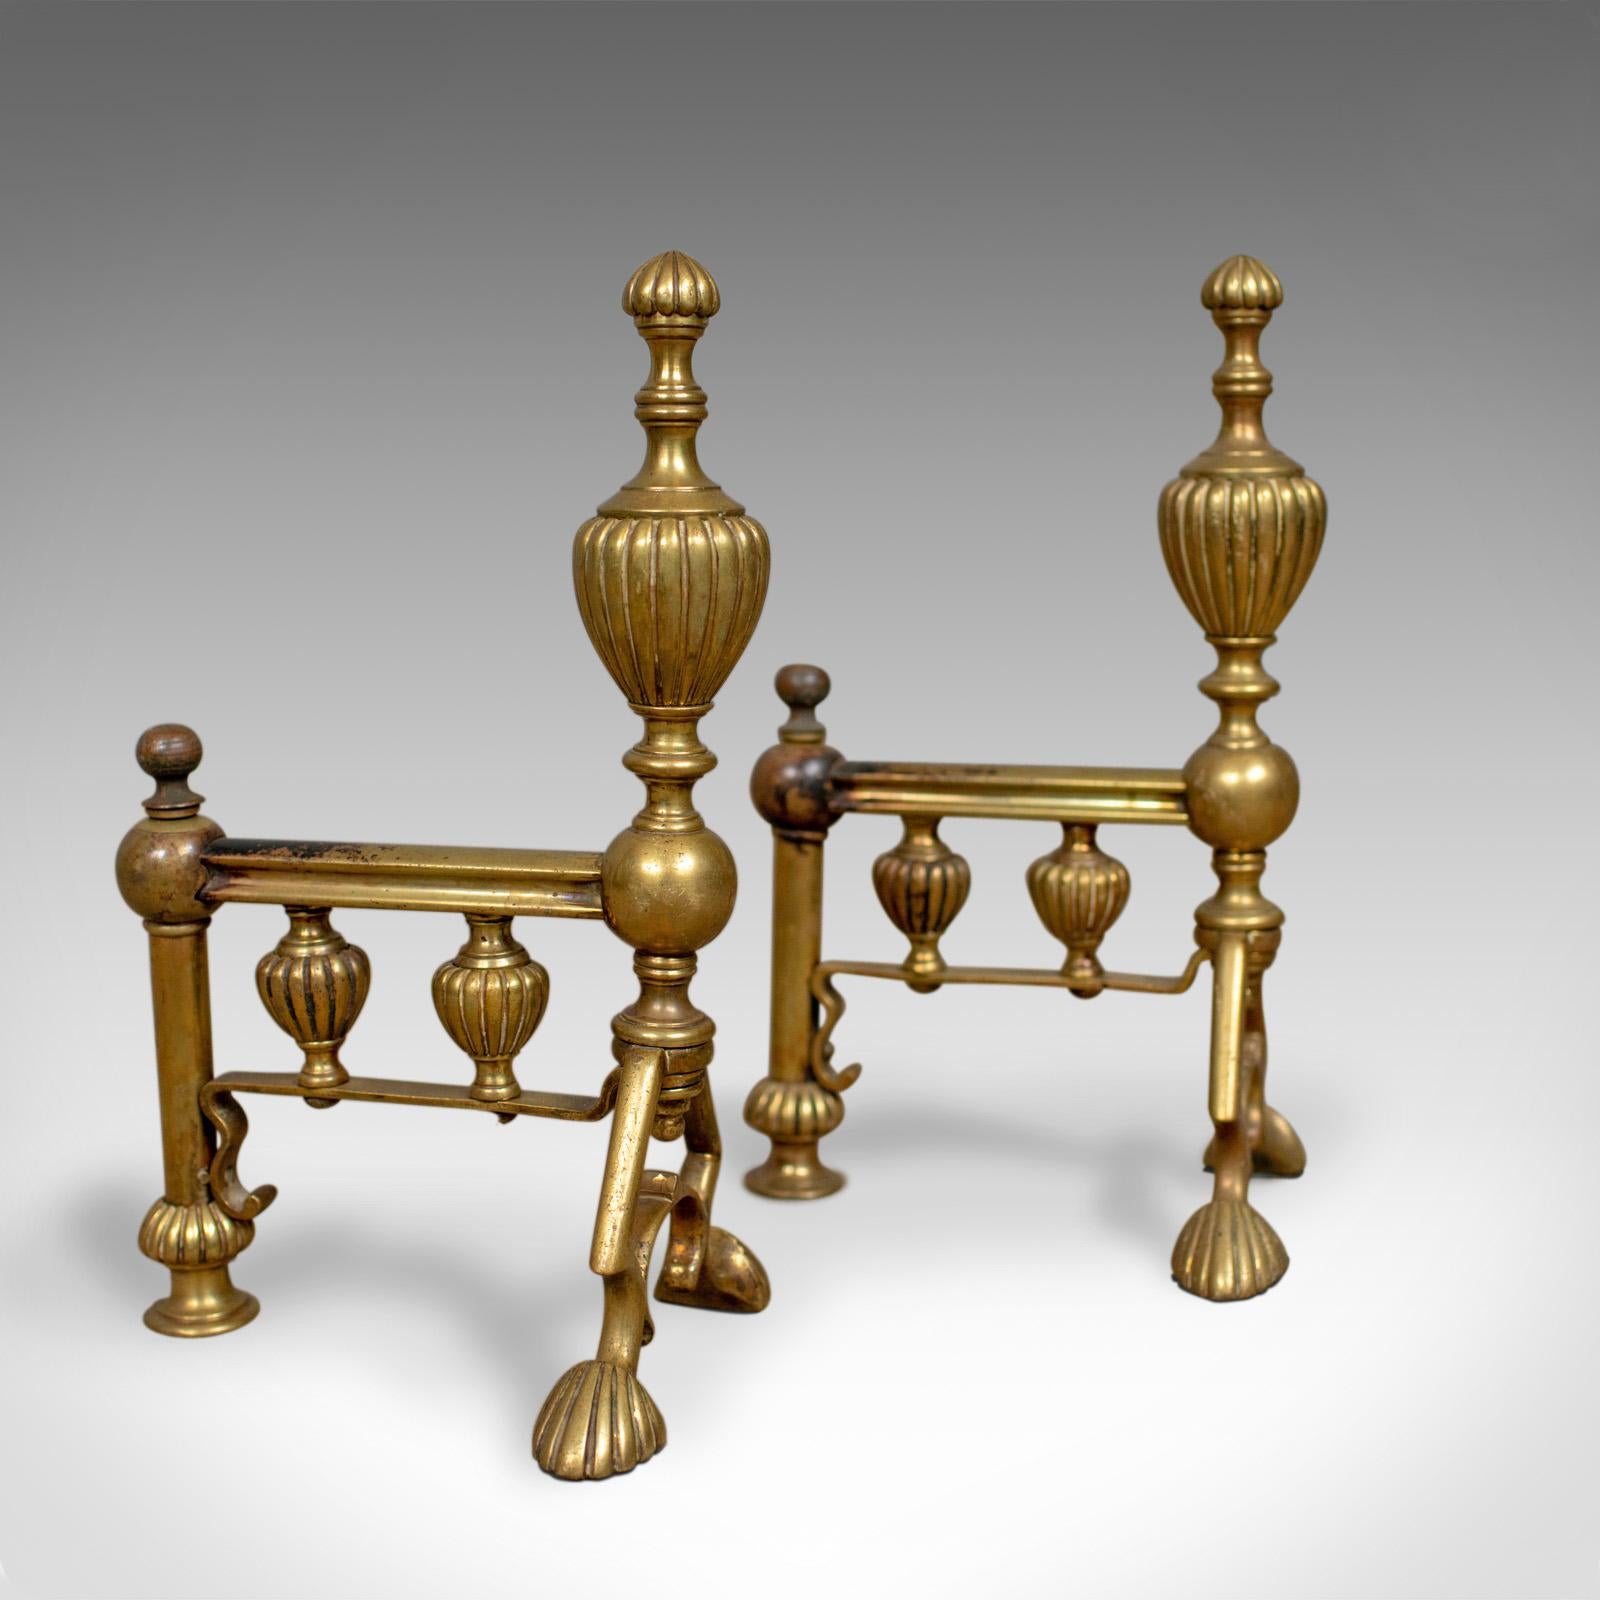 Brass Antique Companion Set of Fire Irons on Rests, Classical Revival, circa 1880